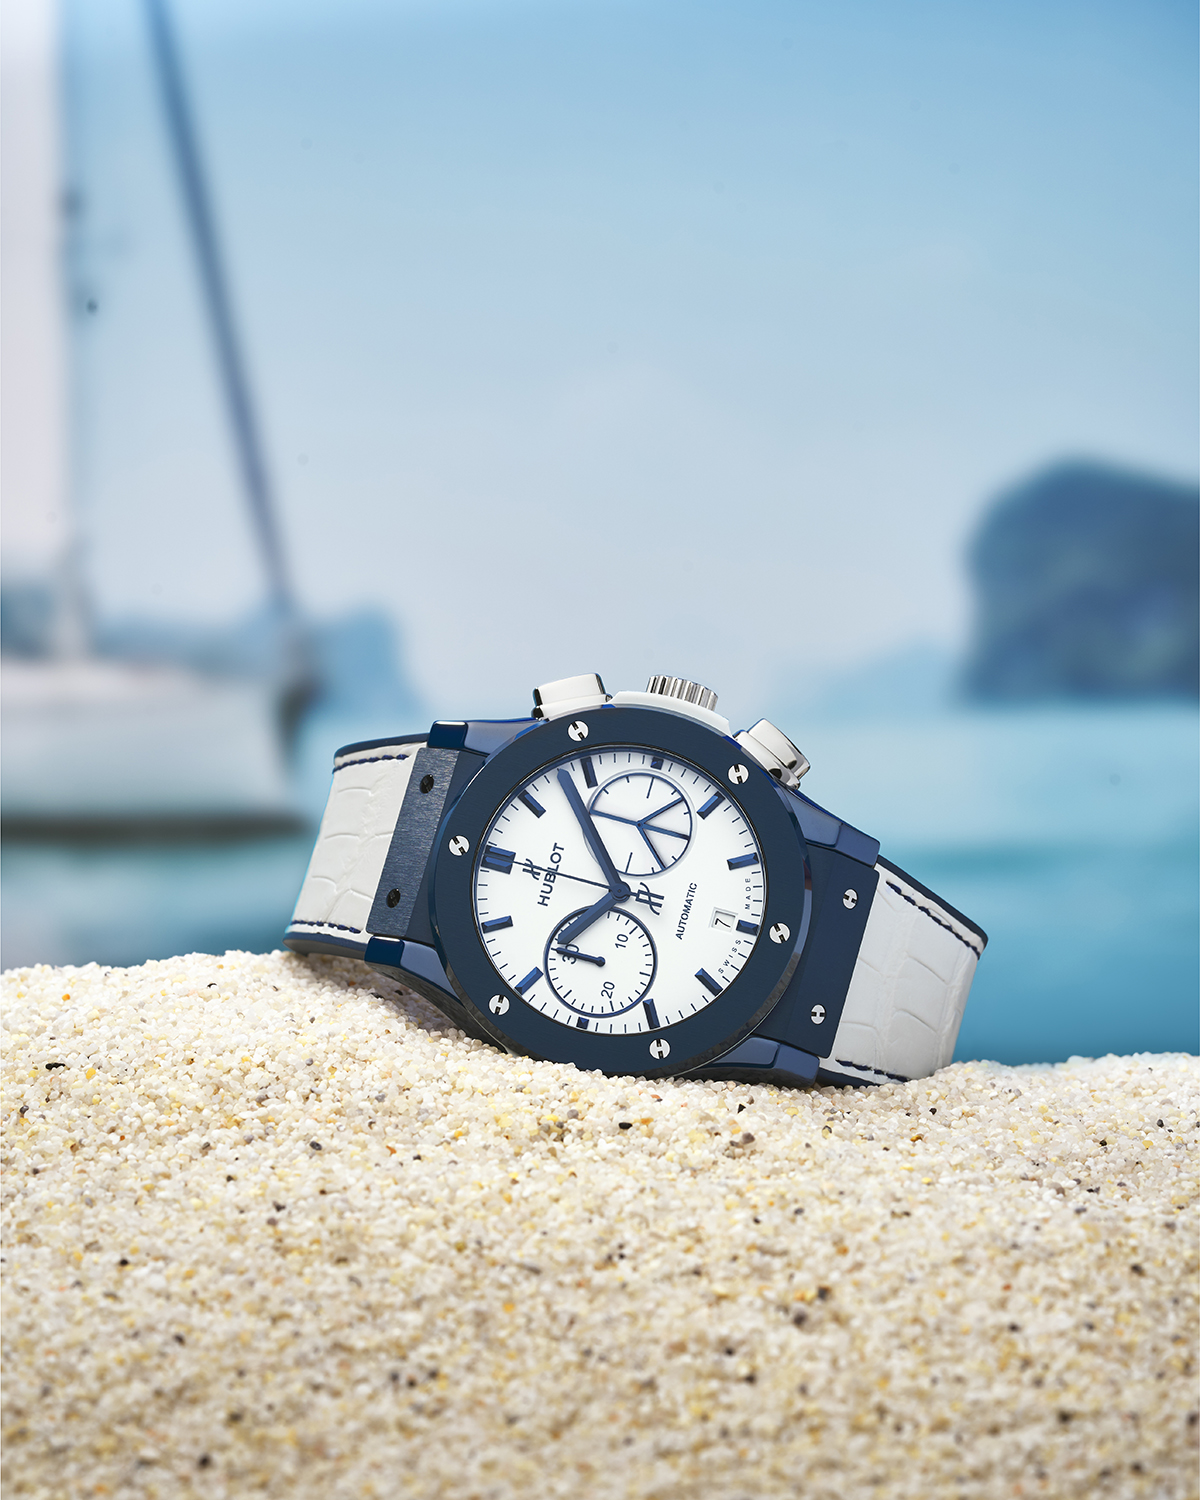 Luxurious blue and white watch pictured on sand